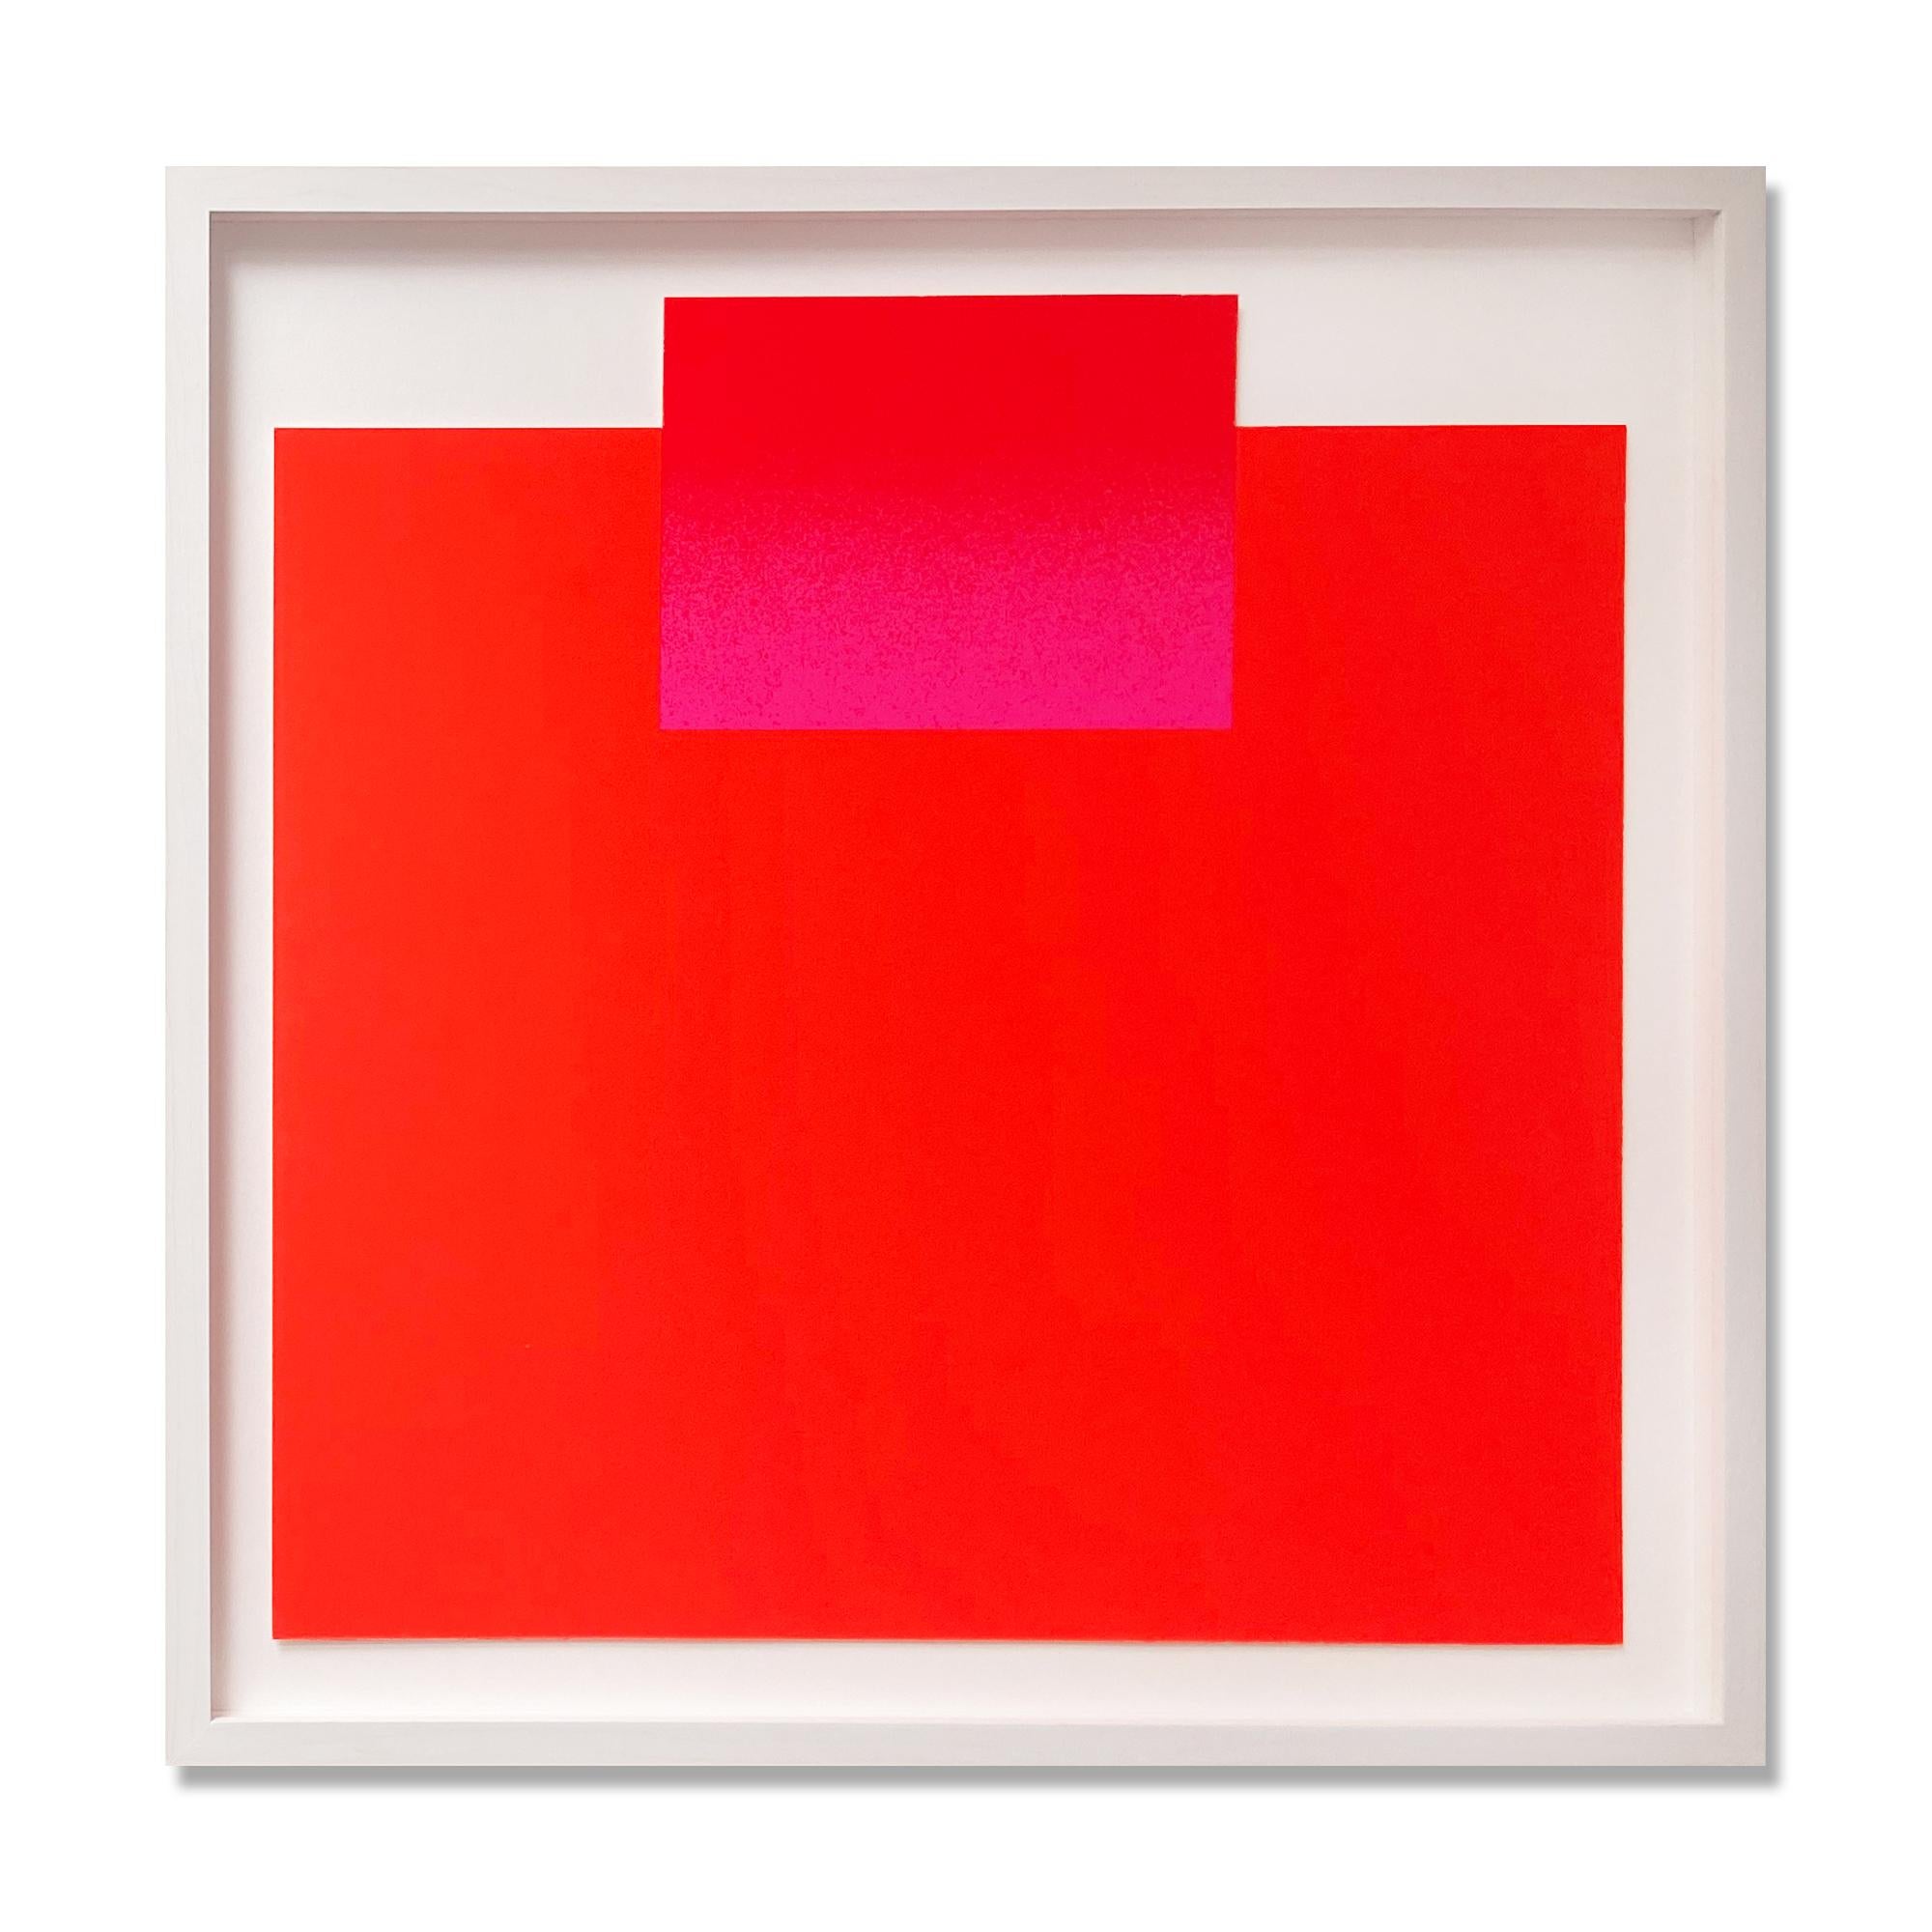 Rupprecht Geiger Abstract Print - Pink and Red on Orange (No. 9 from all die roten Farben), Abstract, Minimalism